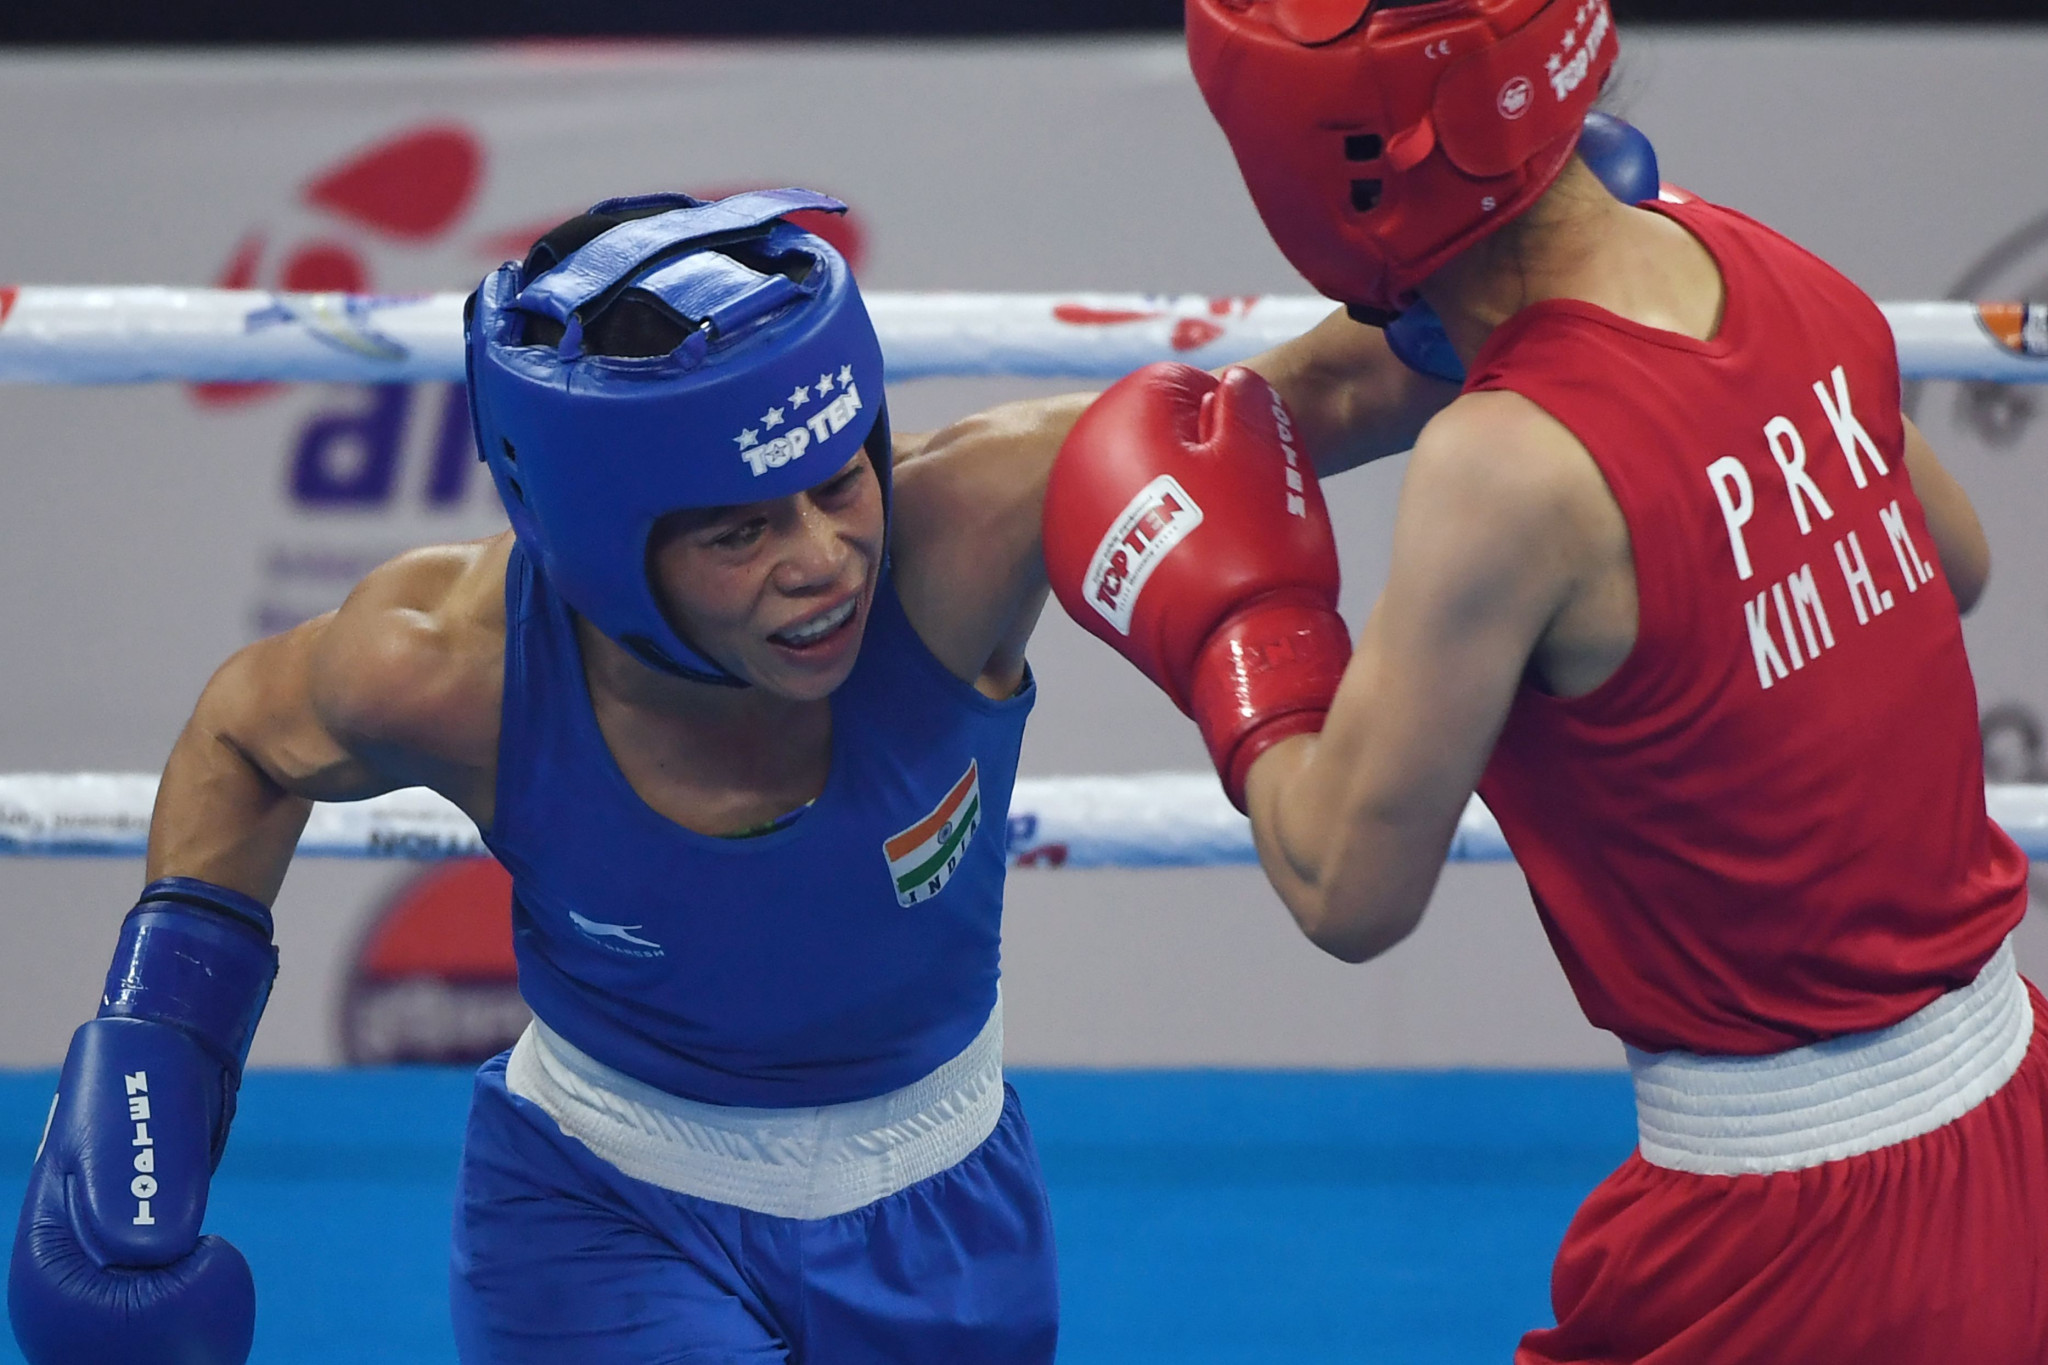 Indian star Mary Kom will be a main draw in the women's competition  ©Getty Images